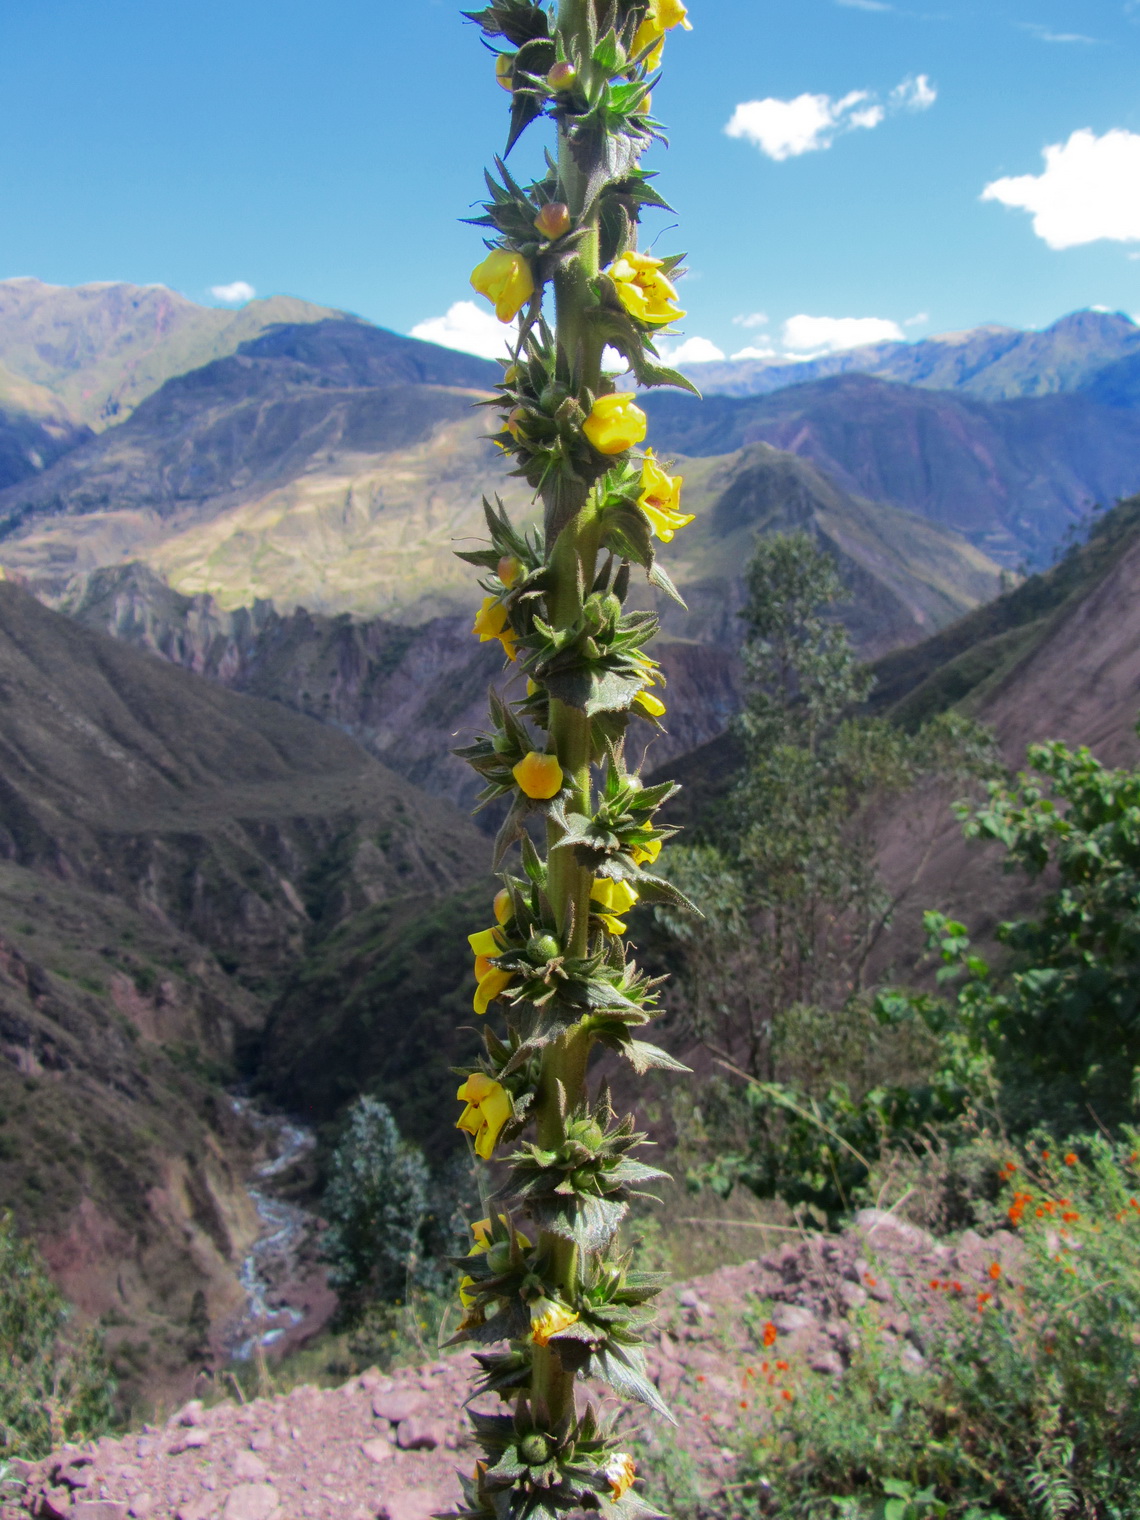 Marvelous plant in full blossom, more than 2 meters high